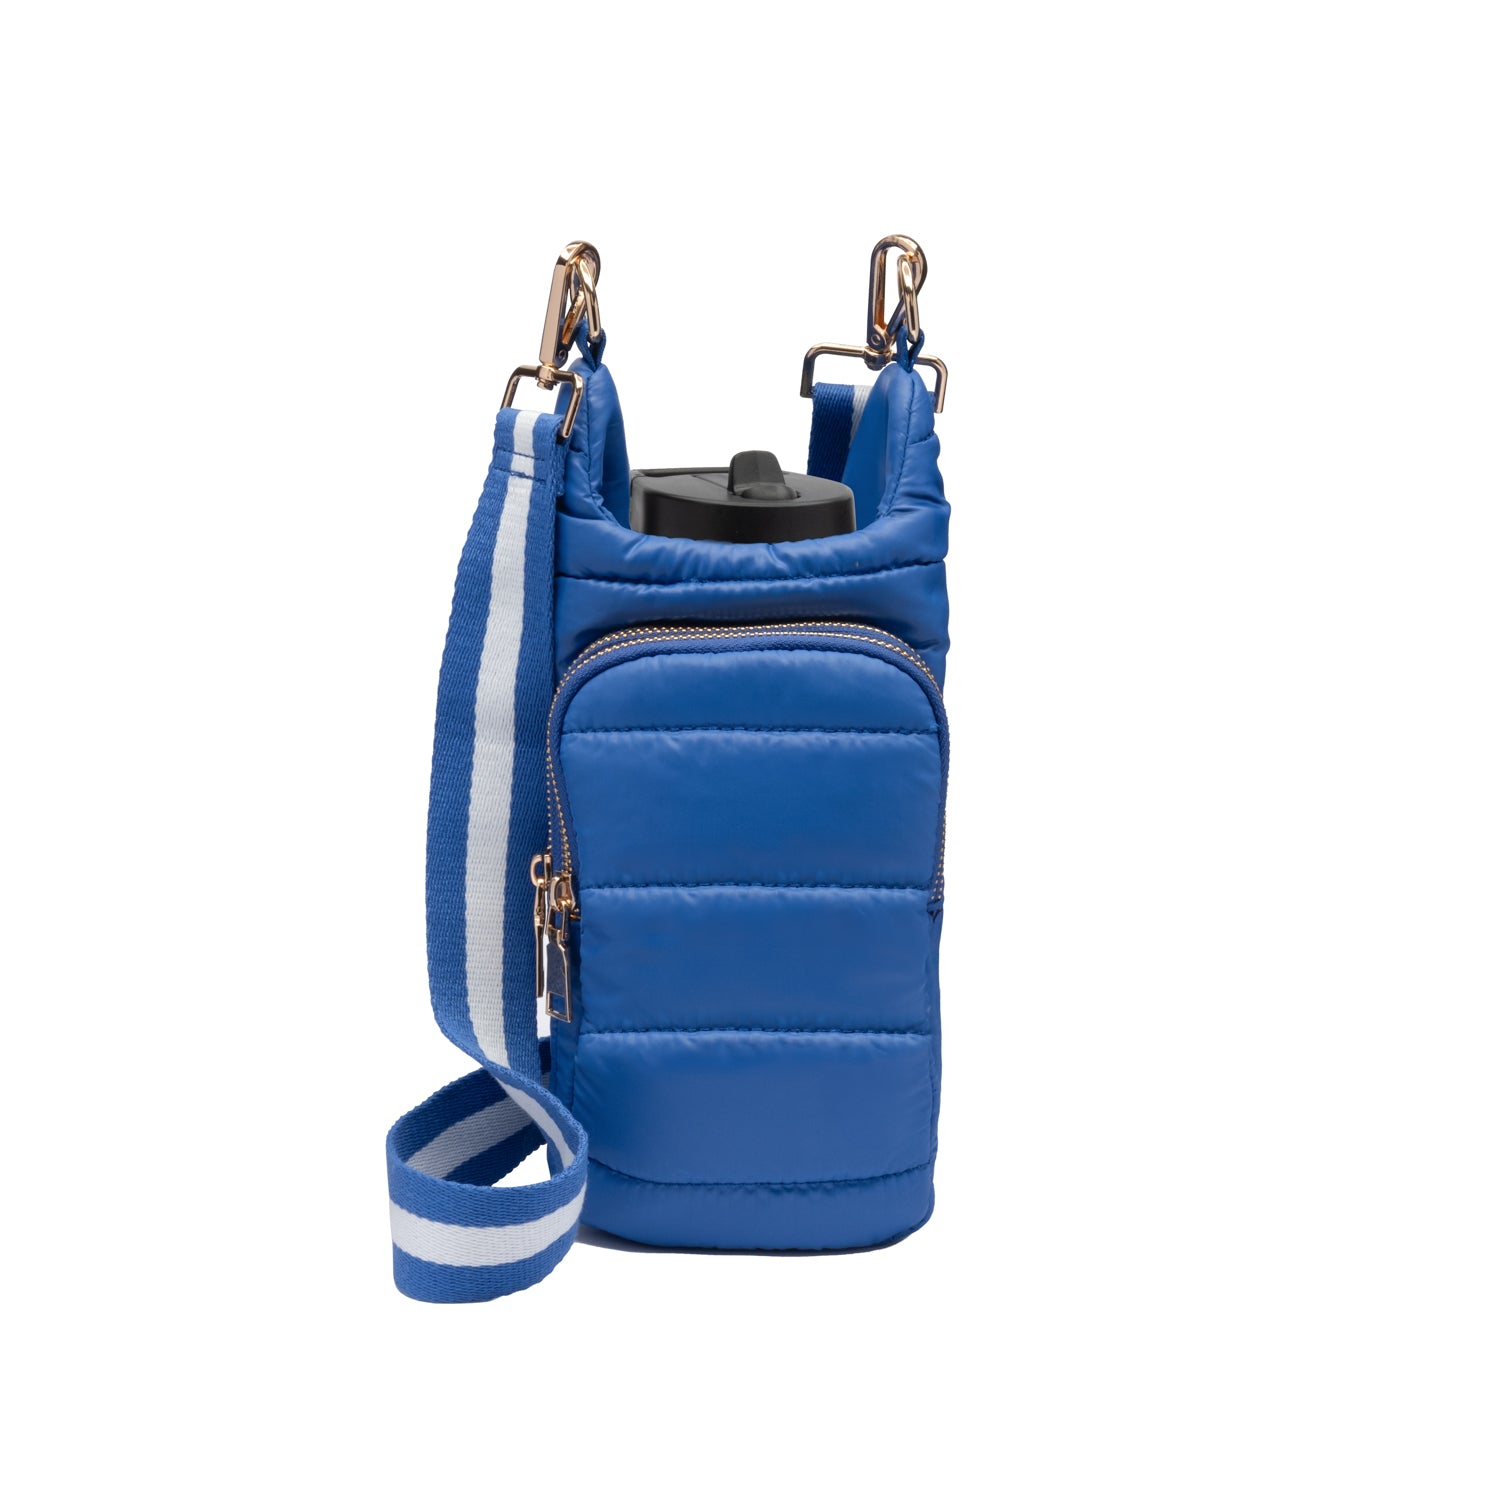 Lapis Blue HydroBag™ with Blue & White Striped Strap